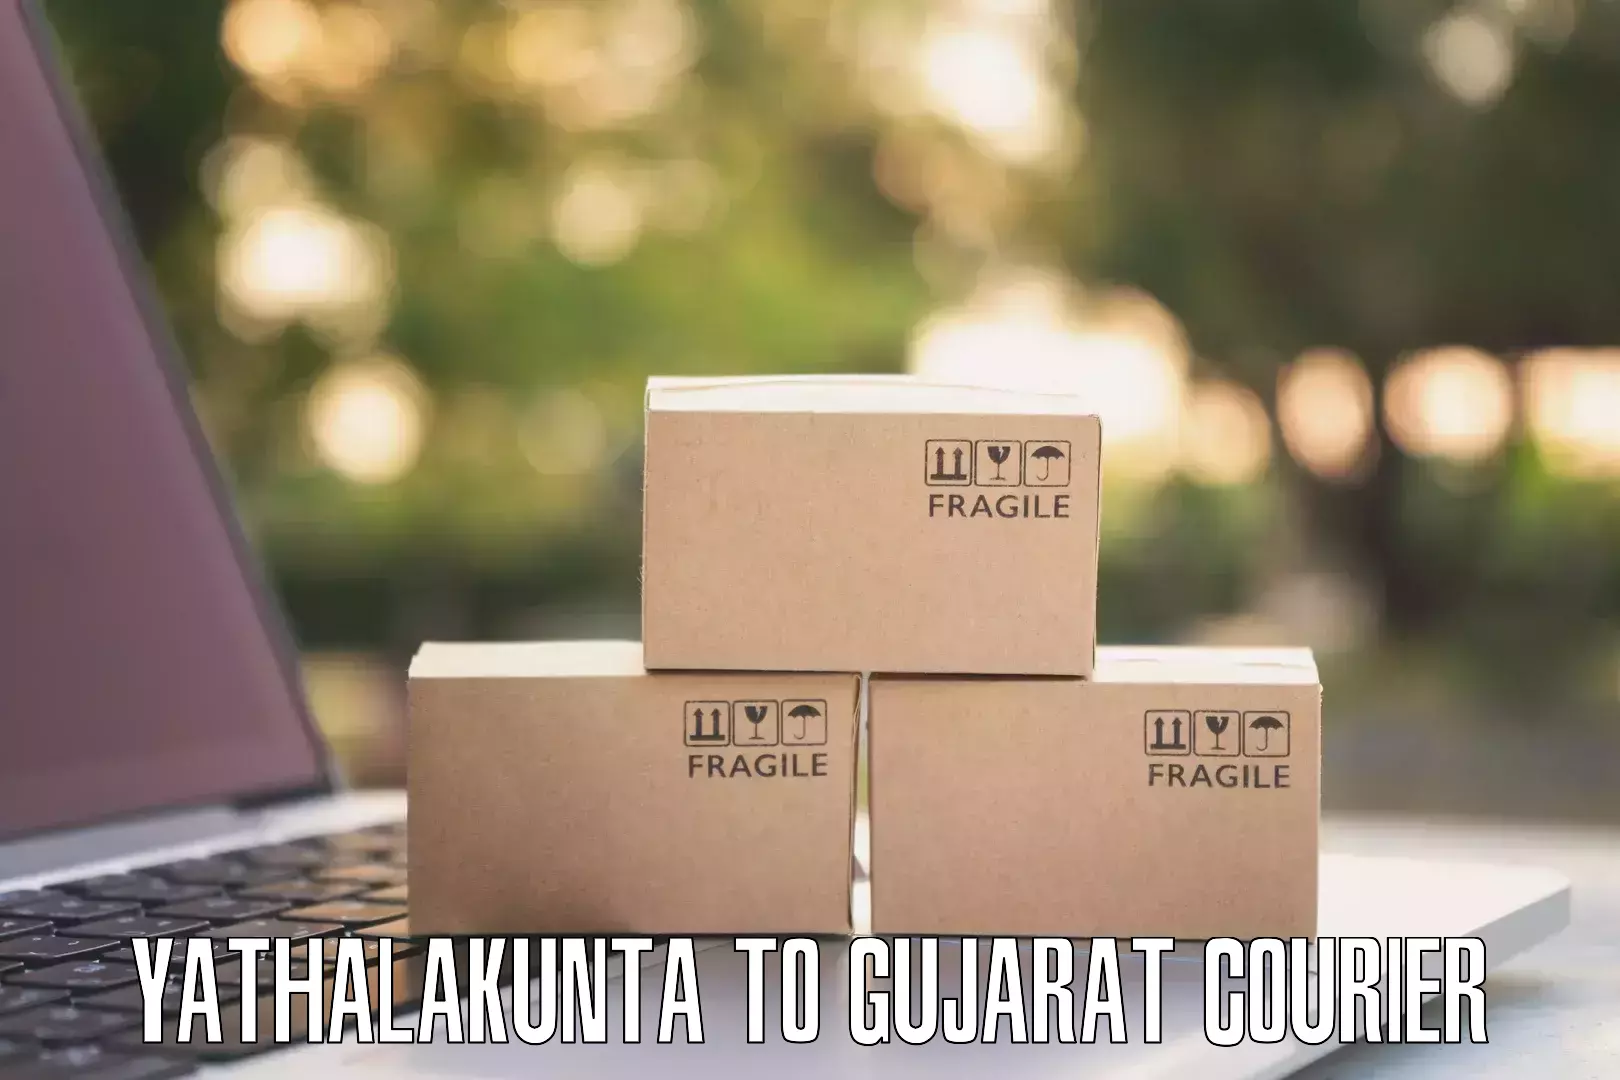 Easy access courier services Yathalakunta to Patan Gujarat